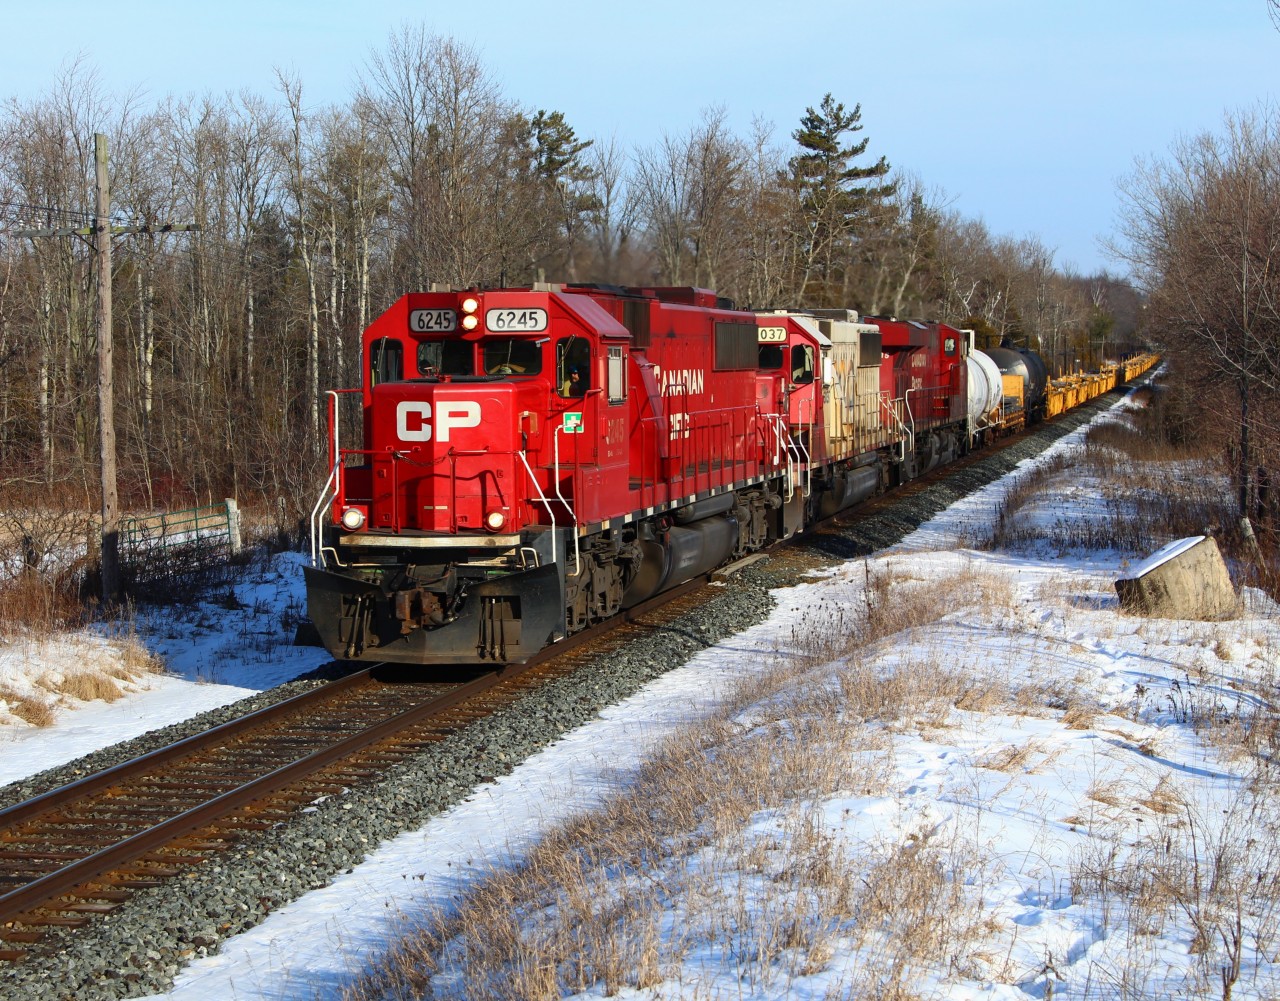 After coming up the Hamilton sub, Ex SOO CP 6245 leads SOO 6037 and CP 8835 up the grade and past MM43 on the Galt sub. Its always nice to see a SOO in its original colour scheme and have the sun shine.